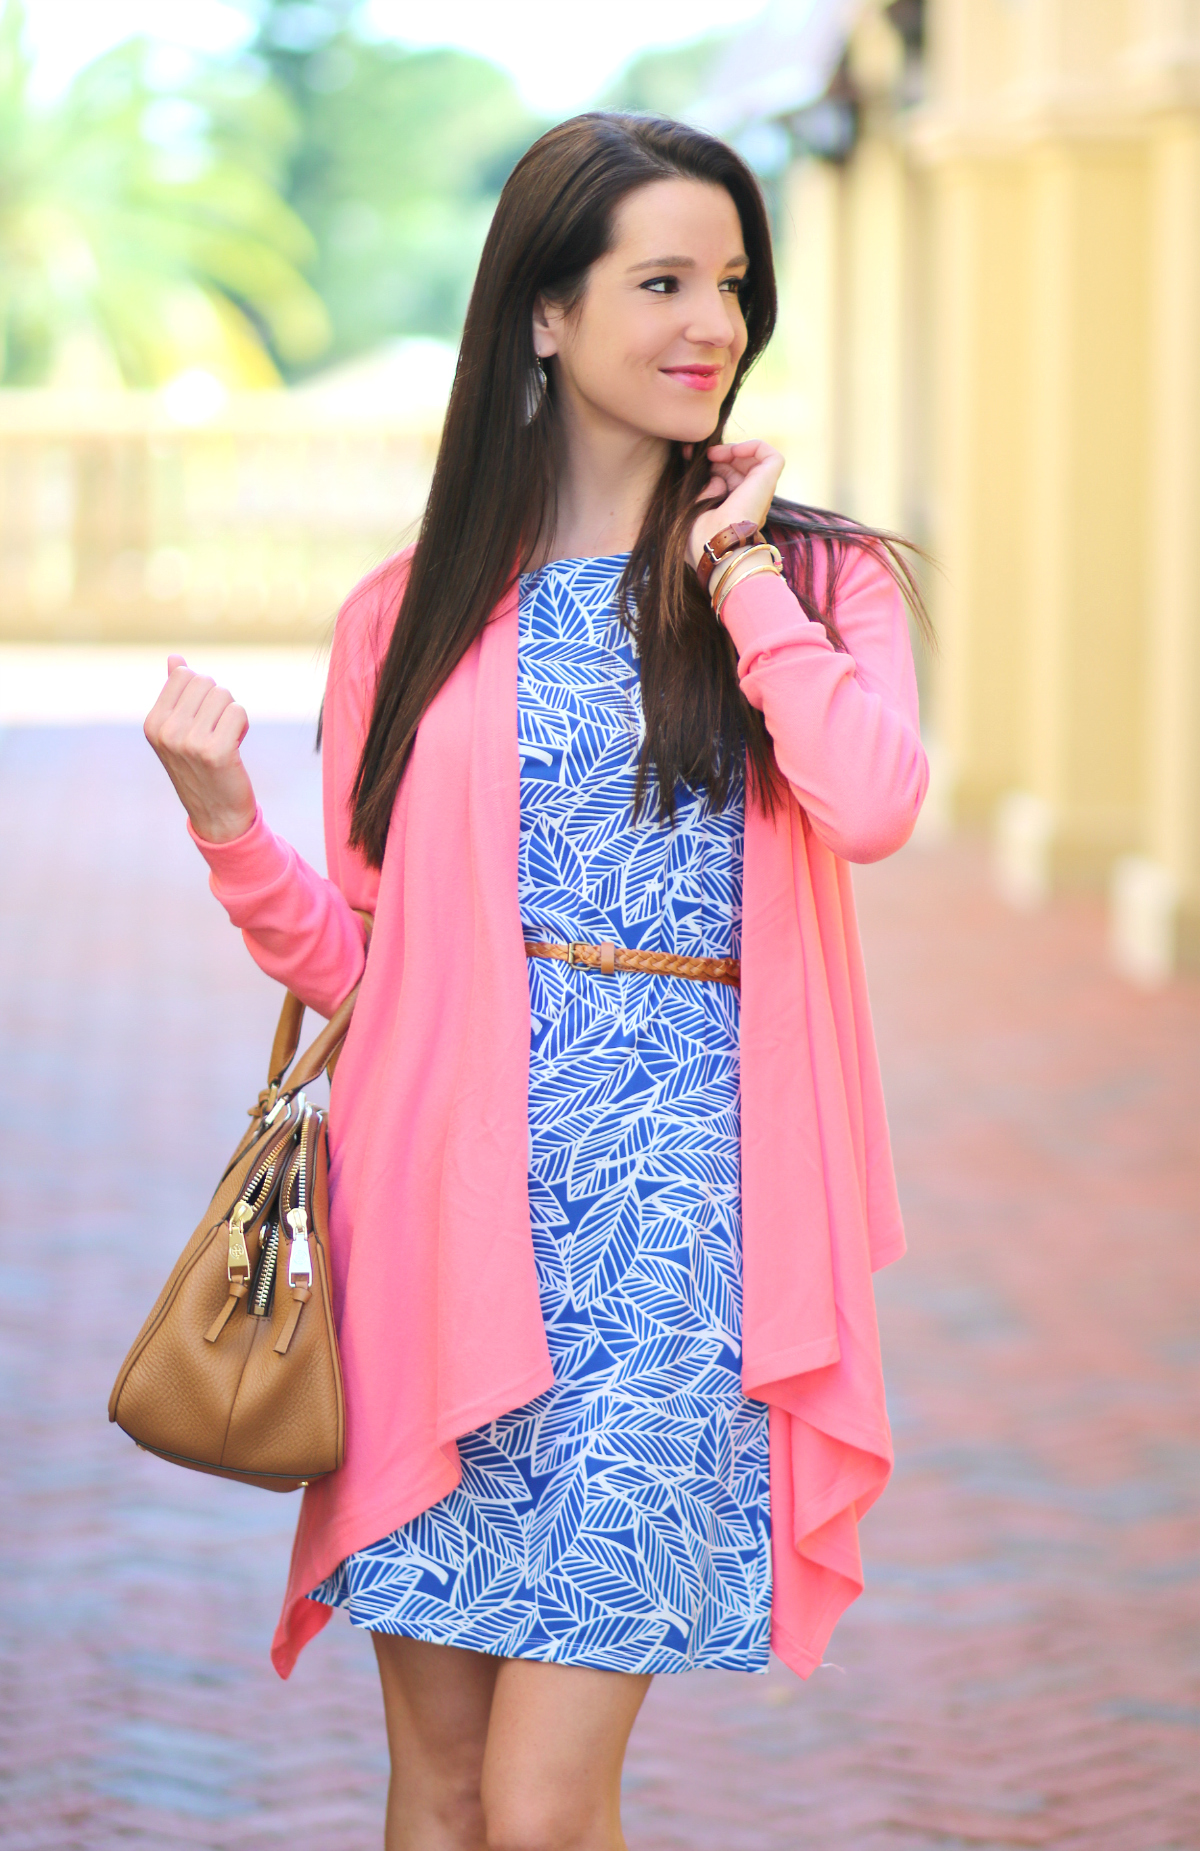 Waterfall Cardigan, All for Color, Resort Wear, Fall Resort Style, Stephanie Ziajka, Diary of a Debutante